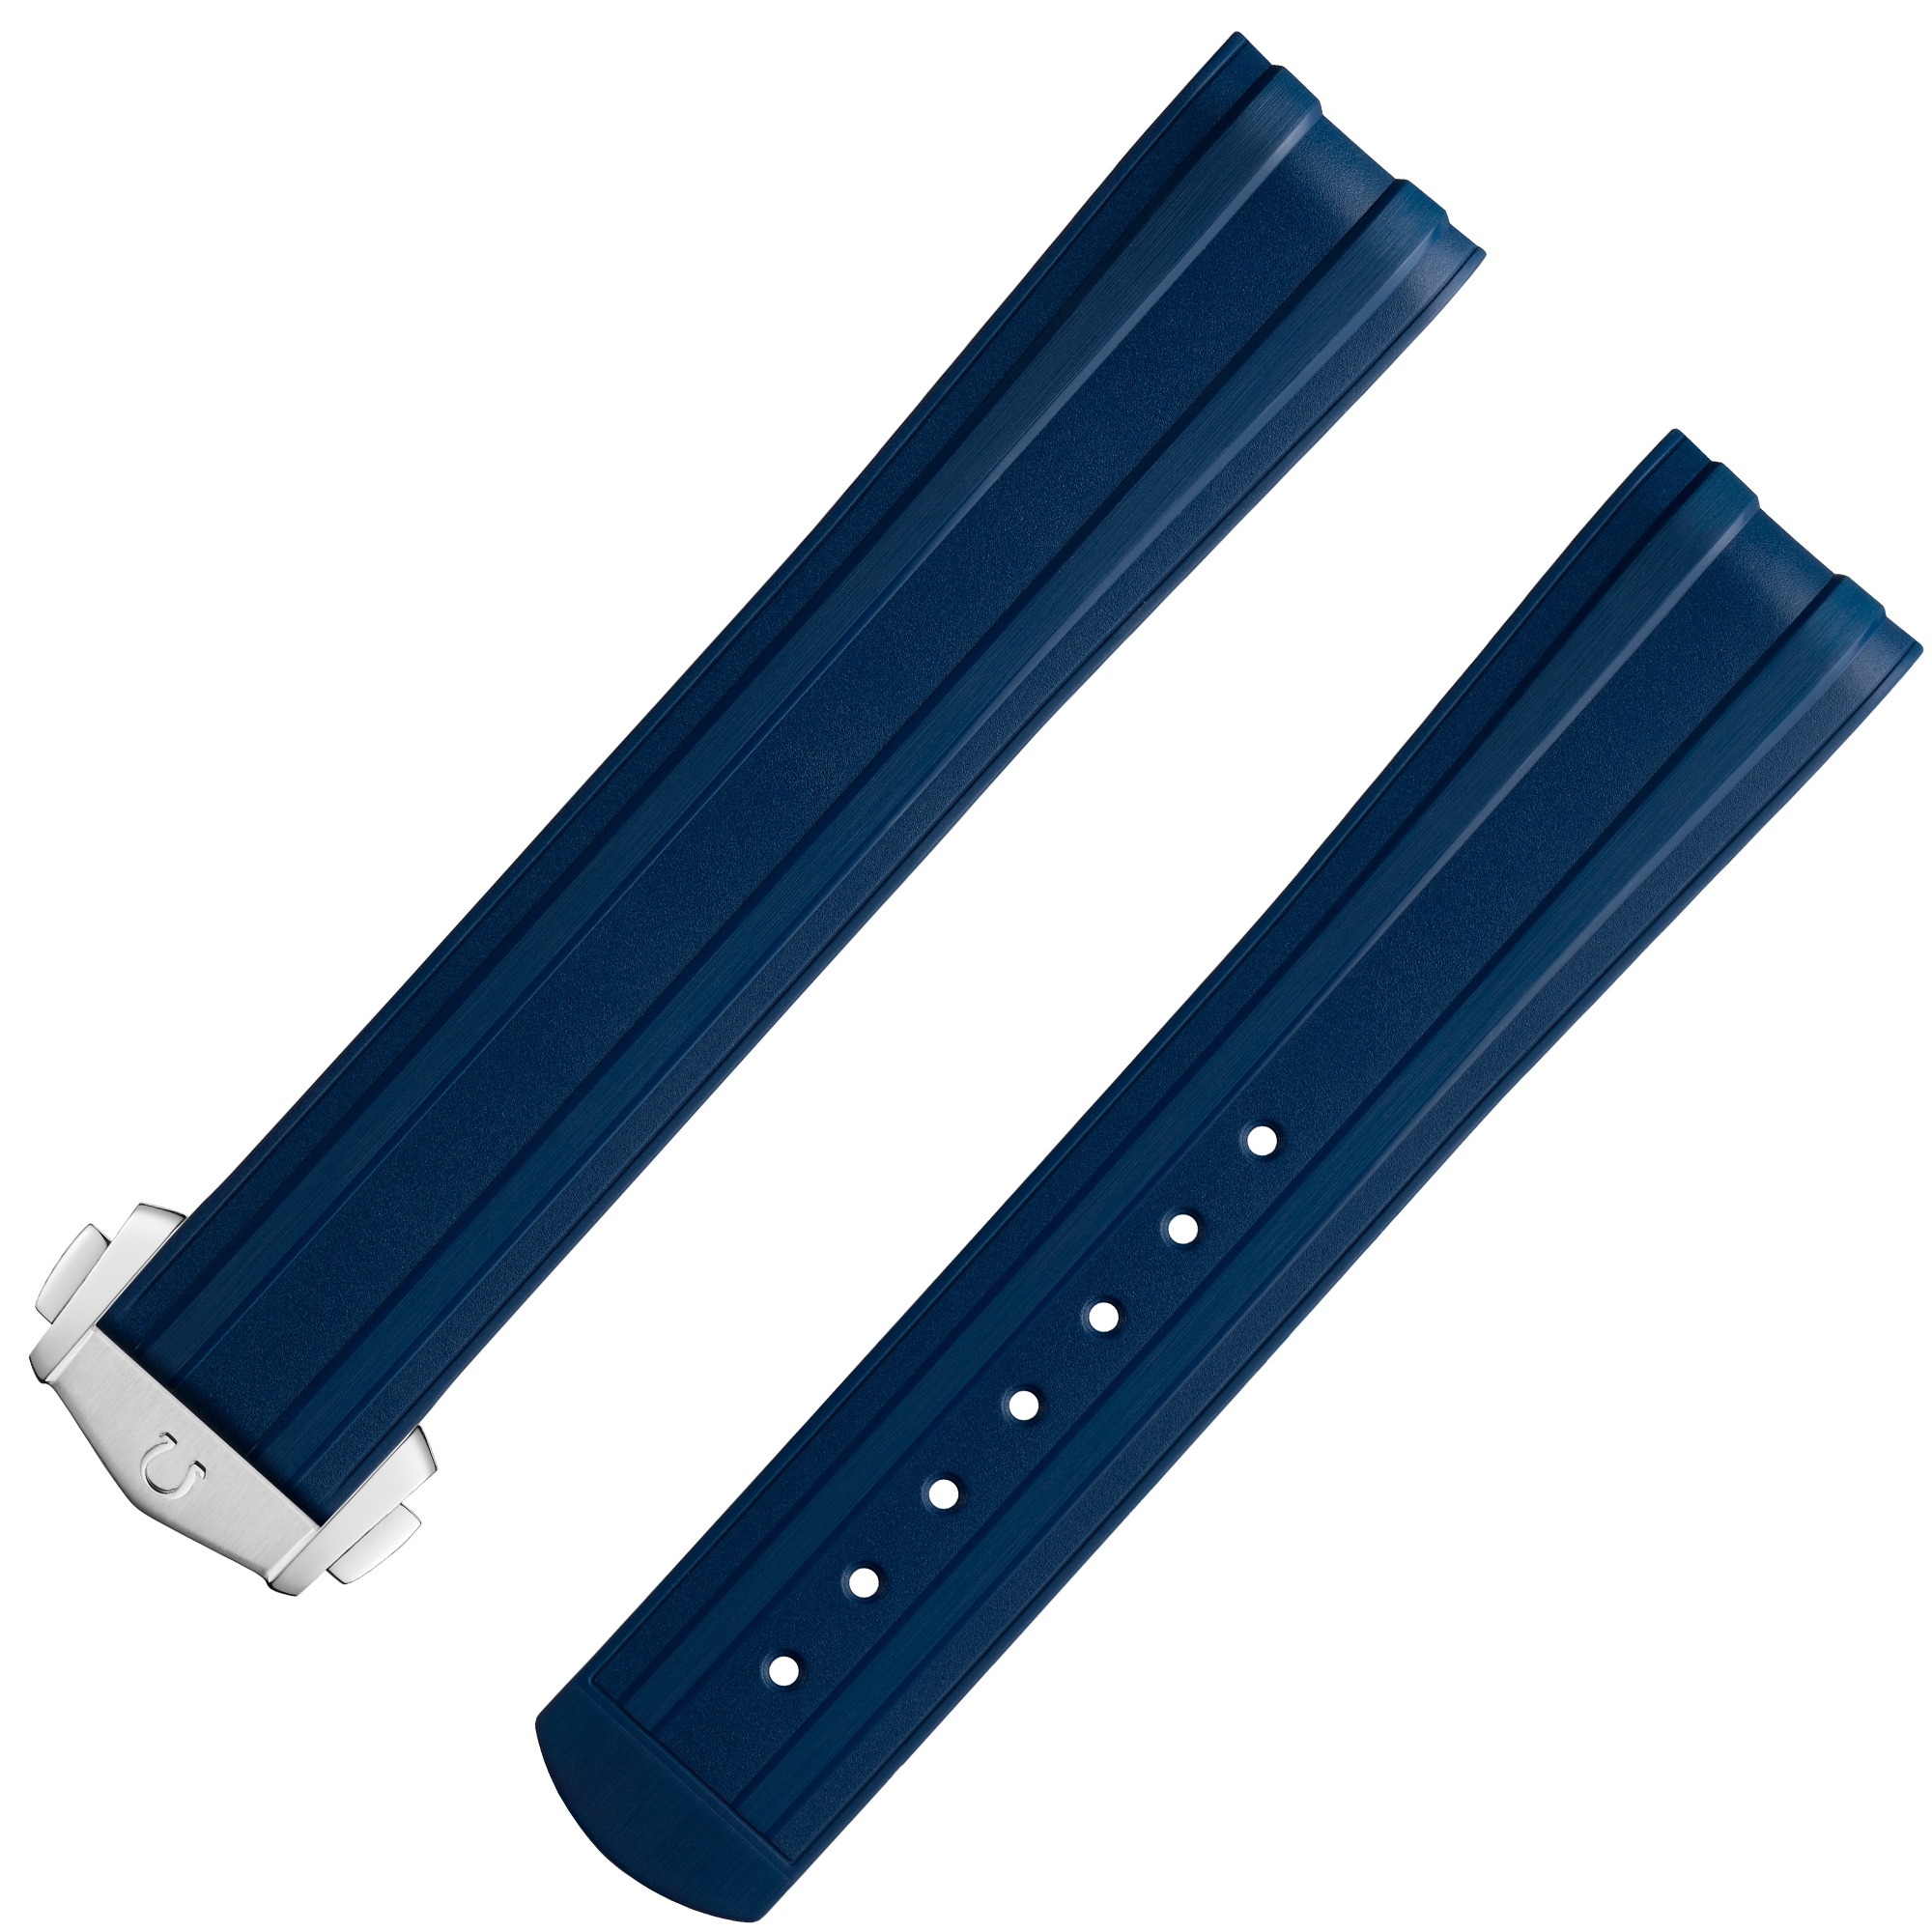 Two-piece strap - Seamaster Diver 300M blue rubber strap with foldover clasp - 032CVZ015753